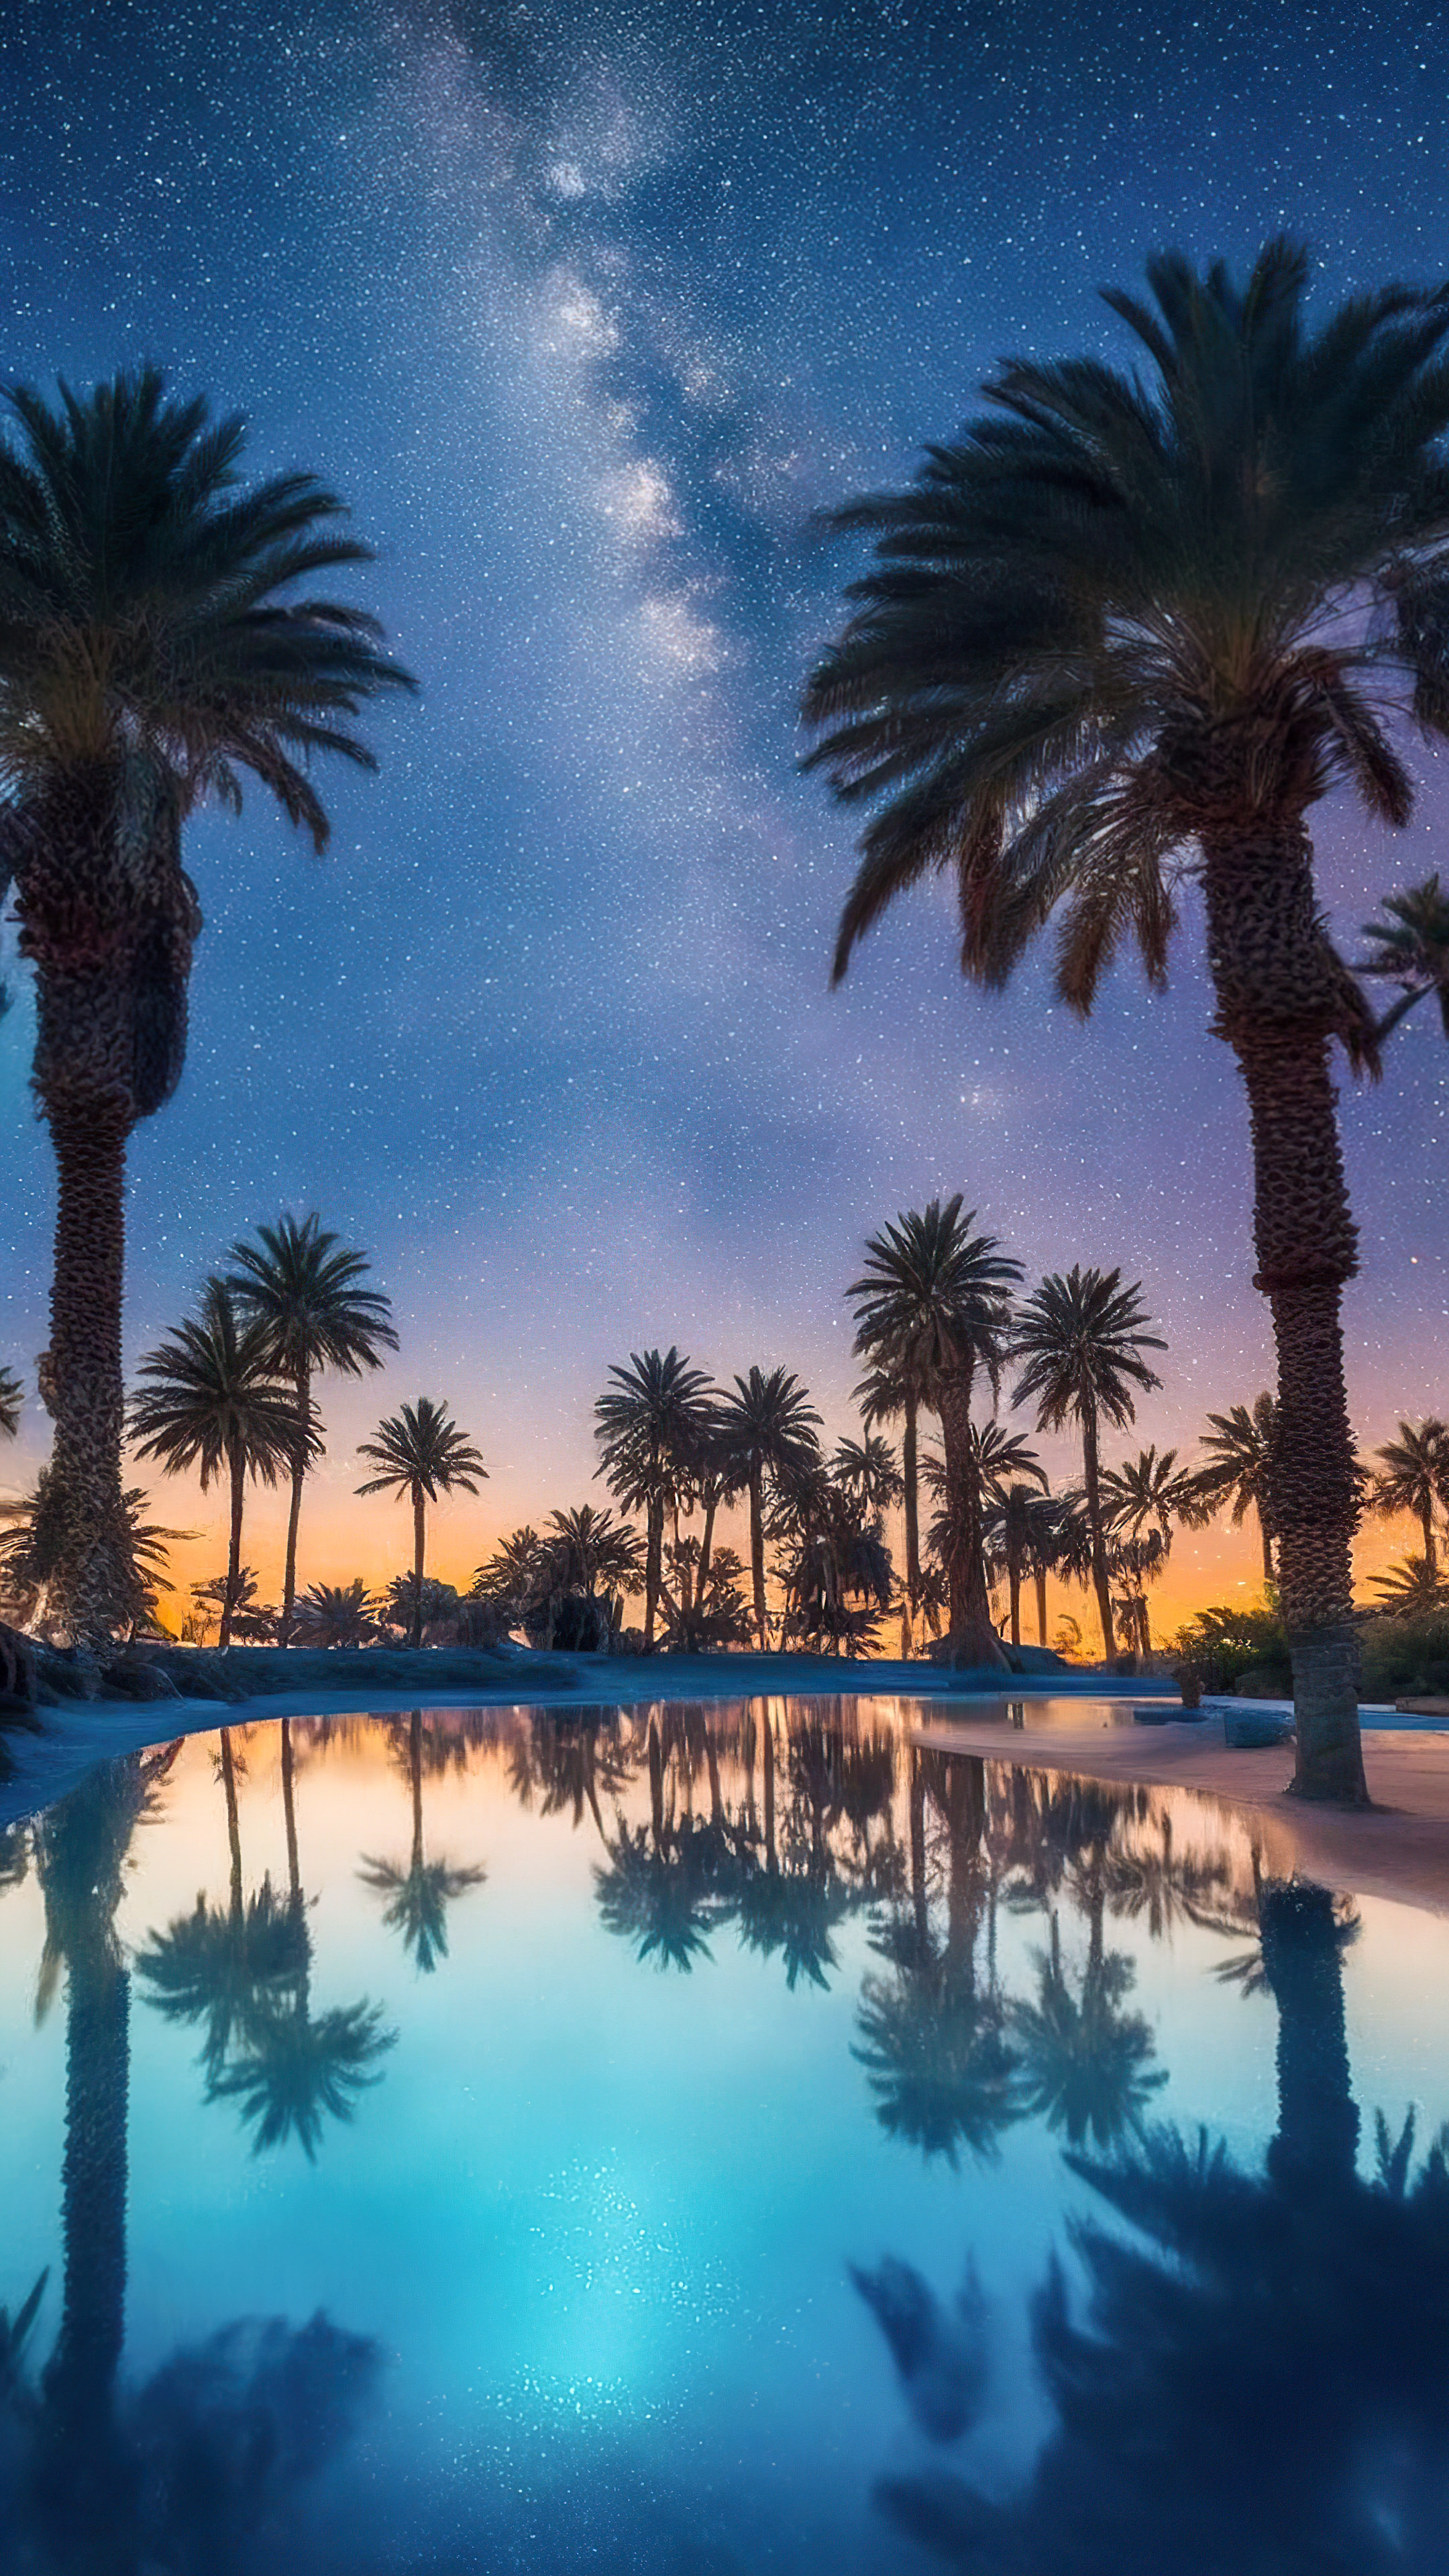 Marvel at the wonder of our starry sky wallpaper, capturing a desert oasis under the Milky Way, where palm trees surround a serene, starry pool.